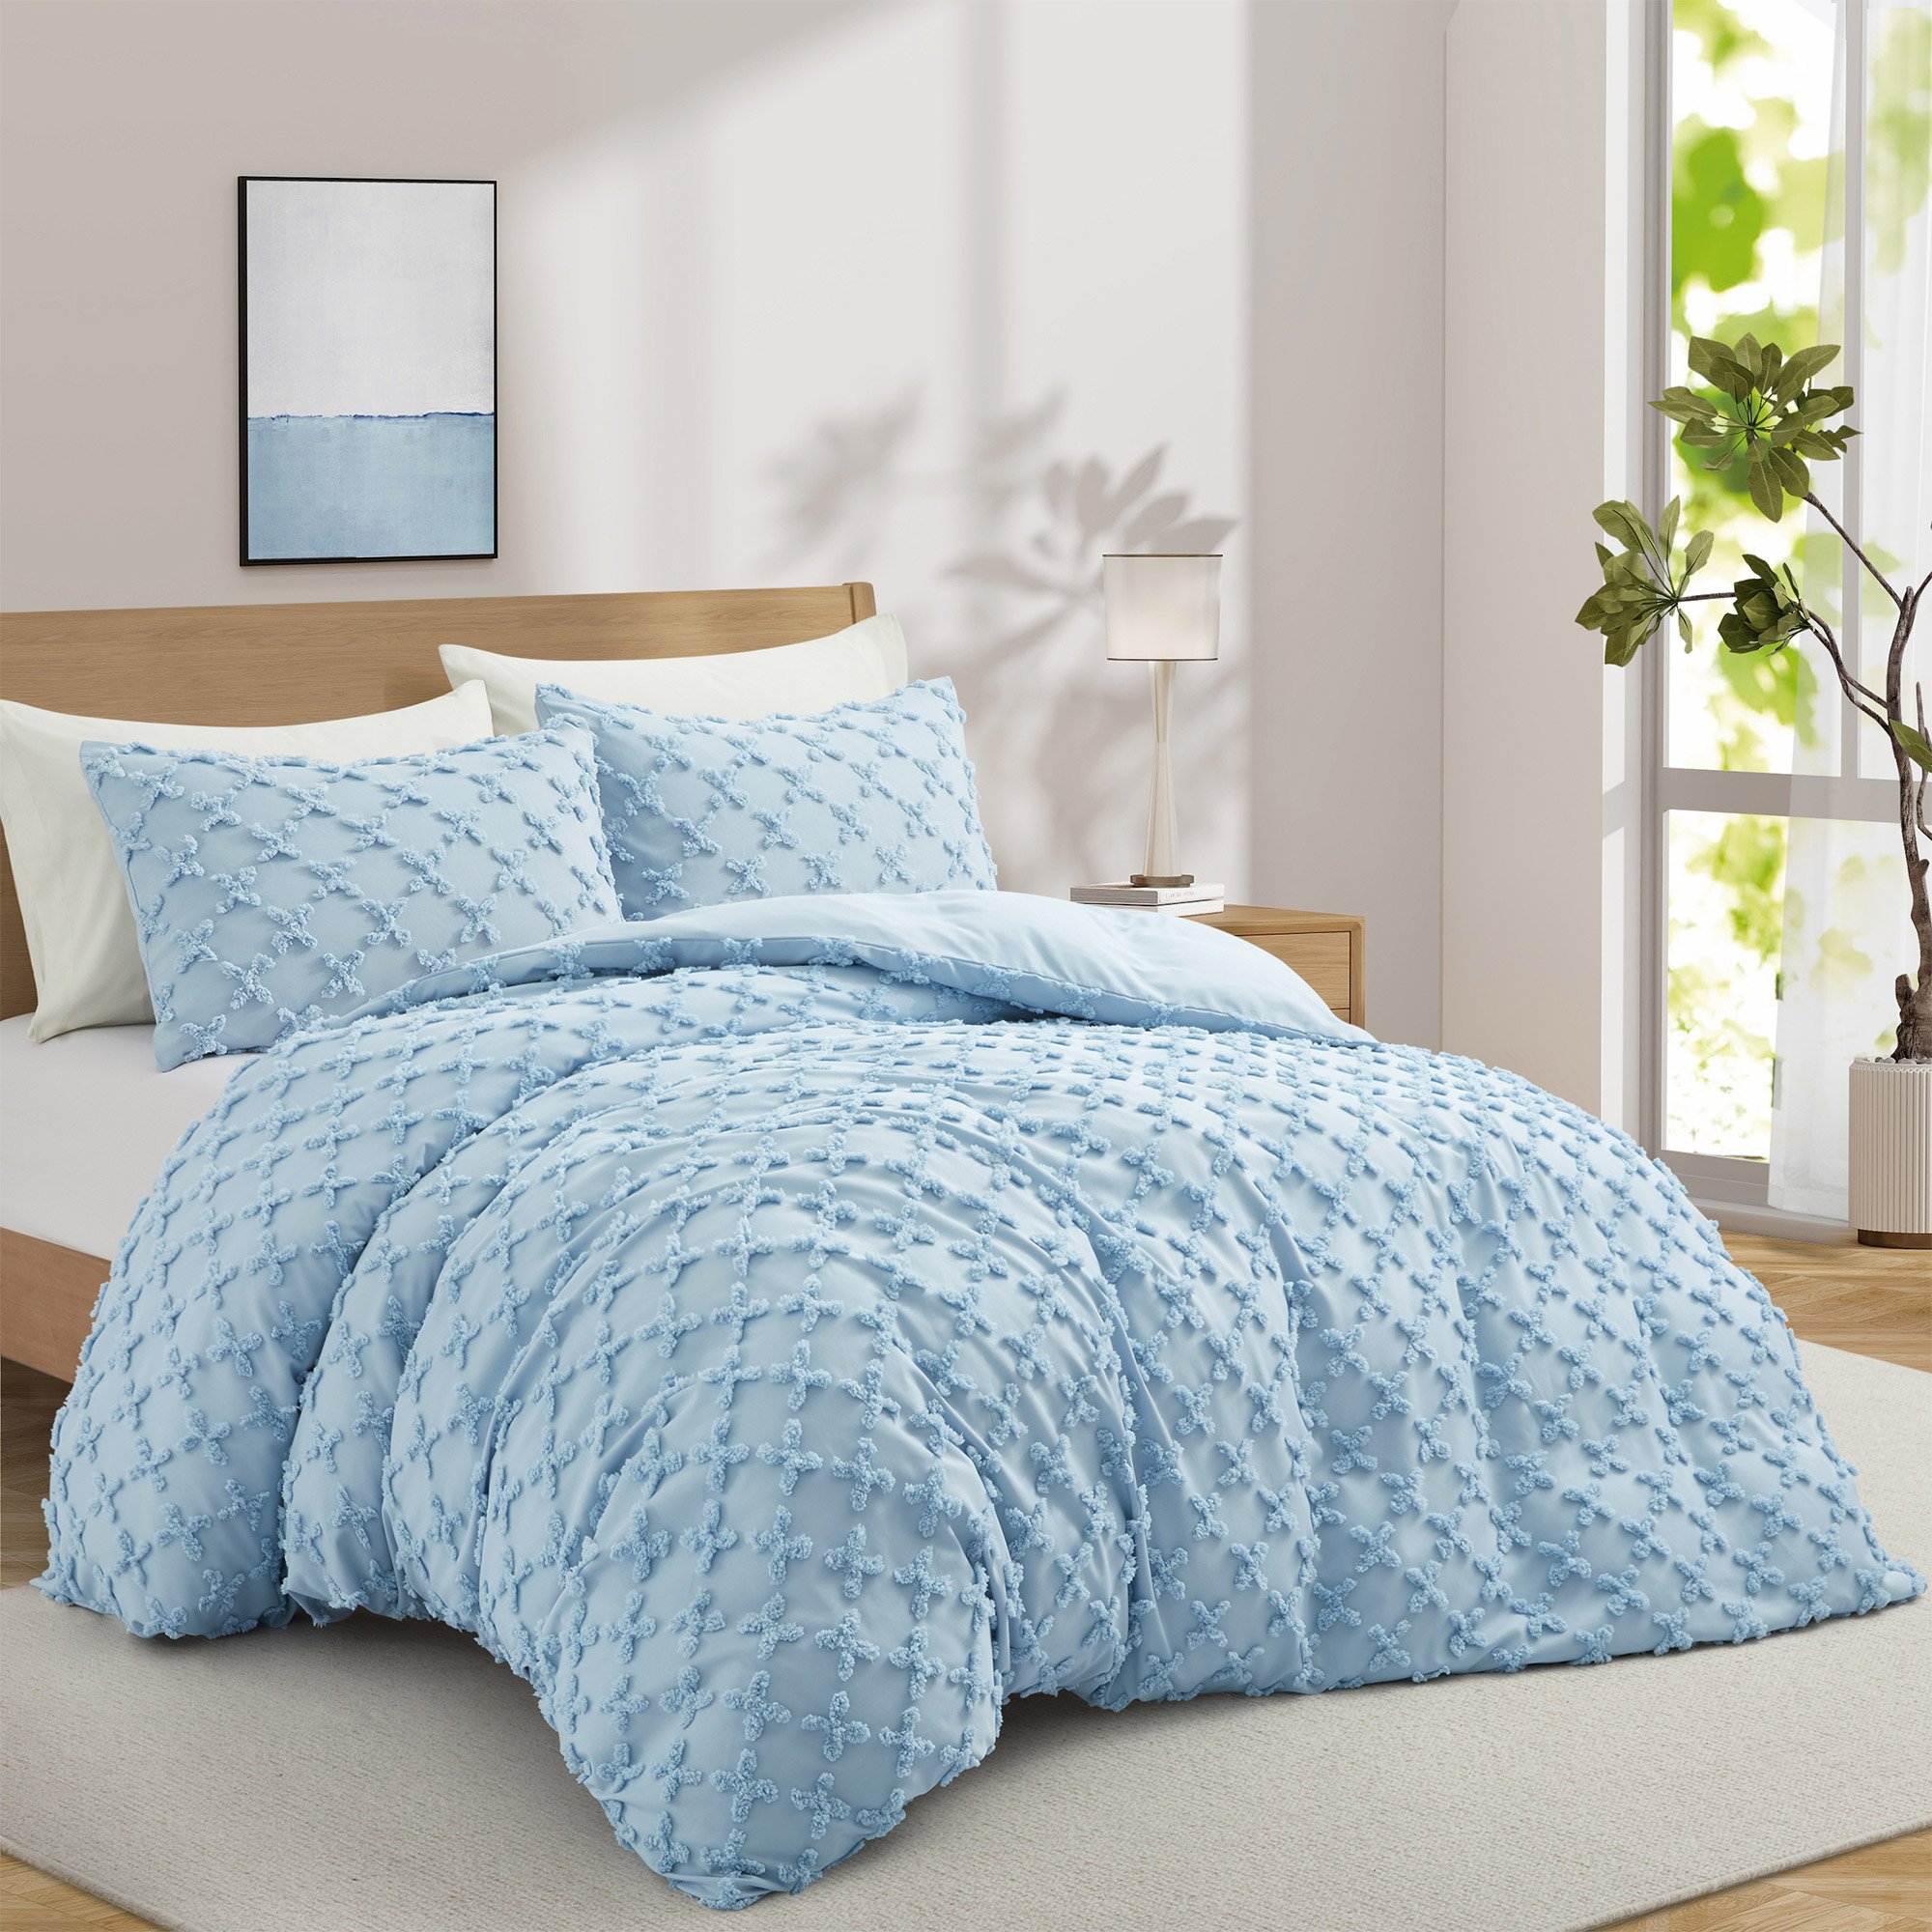 2 Or 3 Piece Soft Microfiber Clipped Duvet Cover Set With Shams - Baby Blue, King-106*90